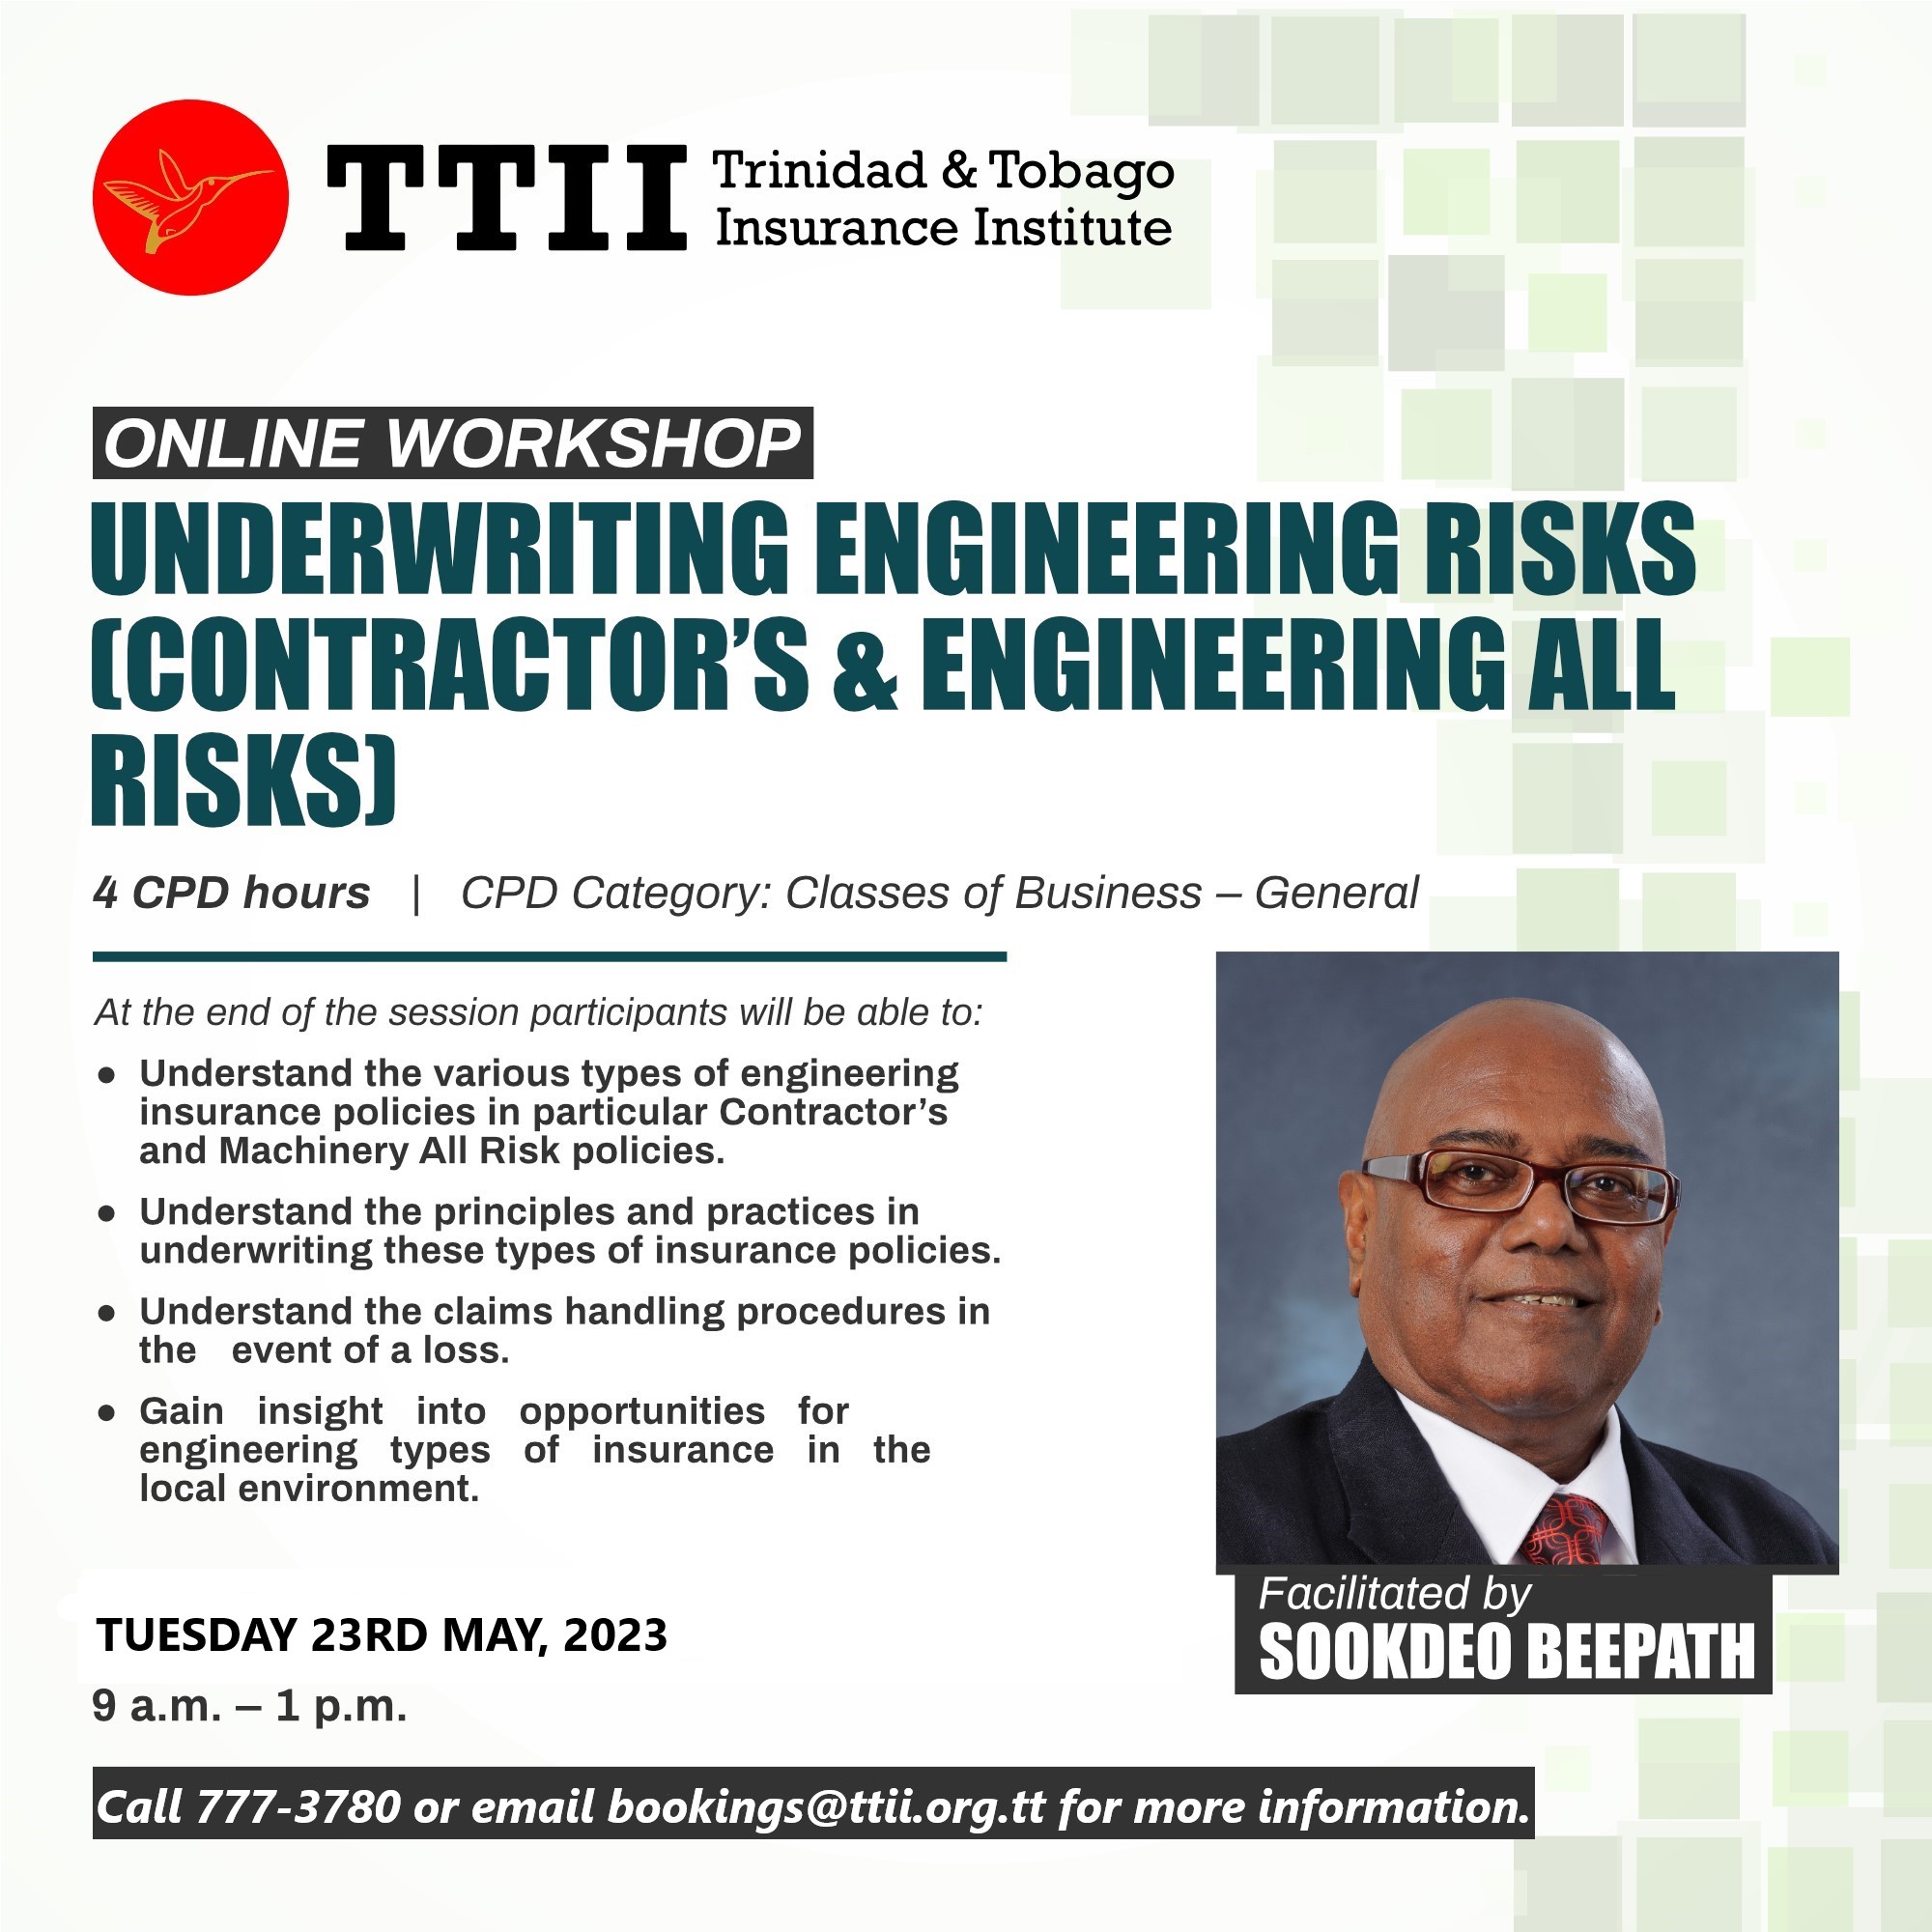 Underwriting Engineering Risks (Contractor’s & Engineering All Risks).